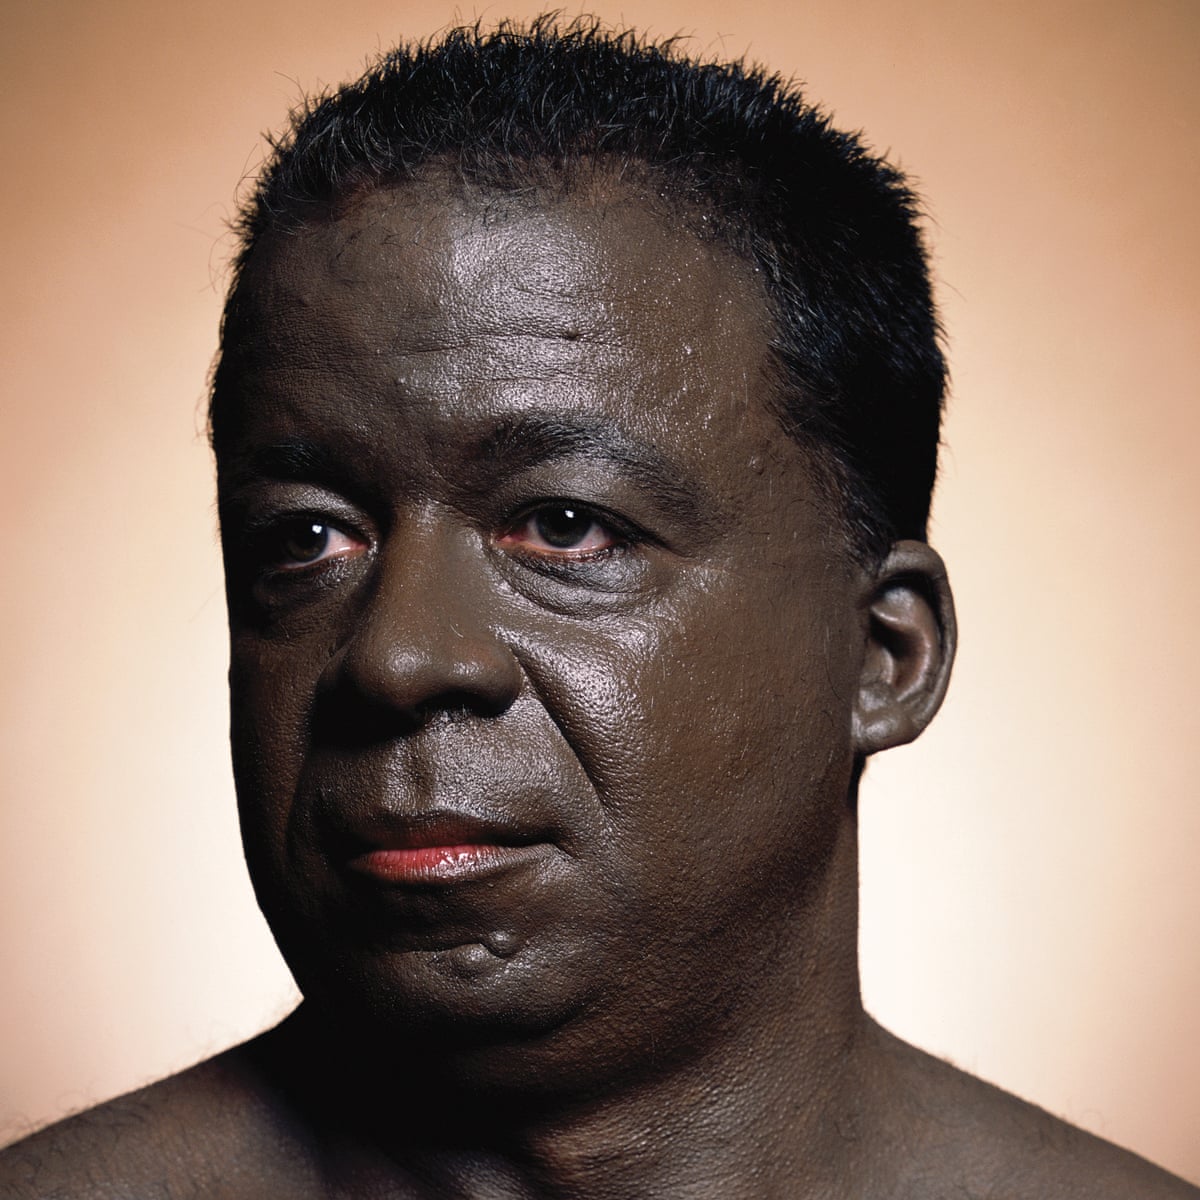 Andres Serrano S Best Photograph A White Man With Black Skin